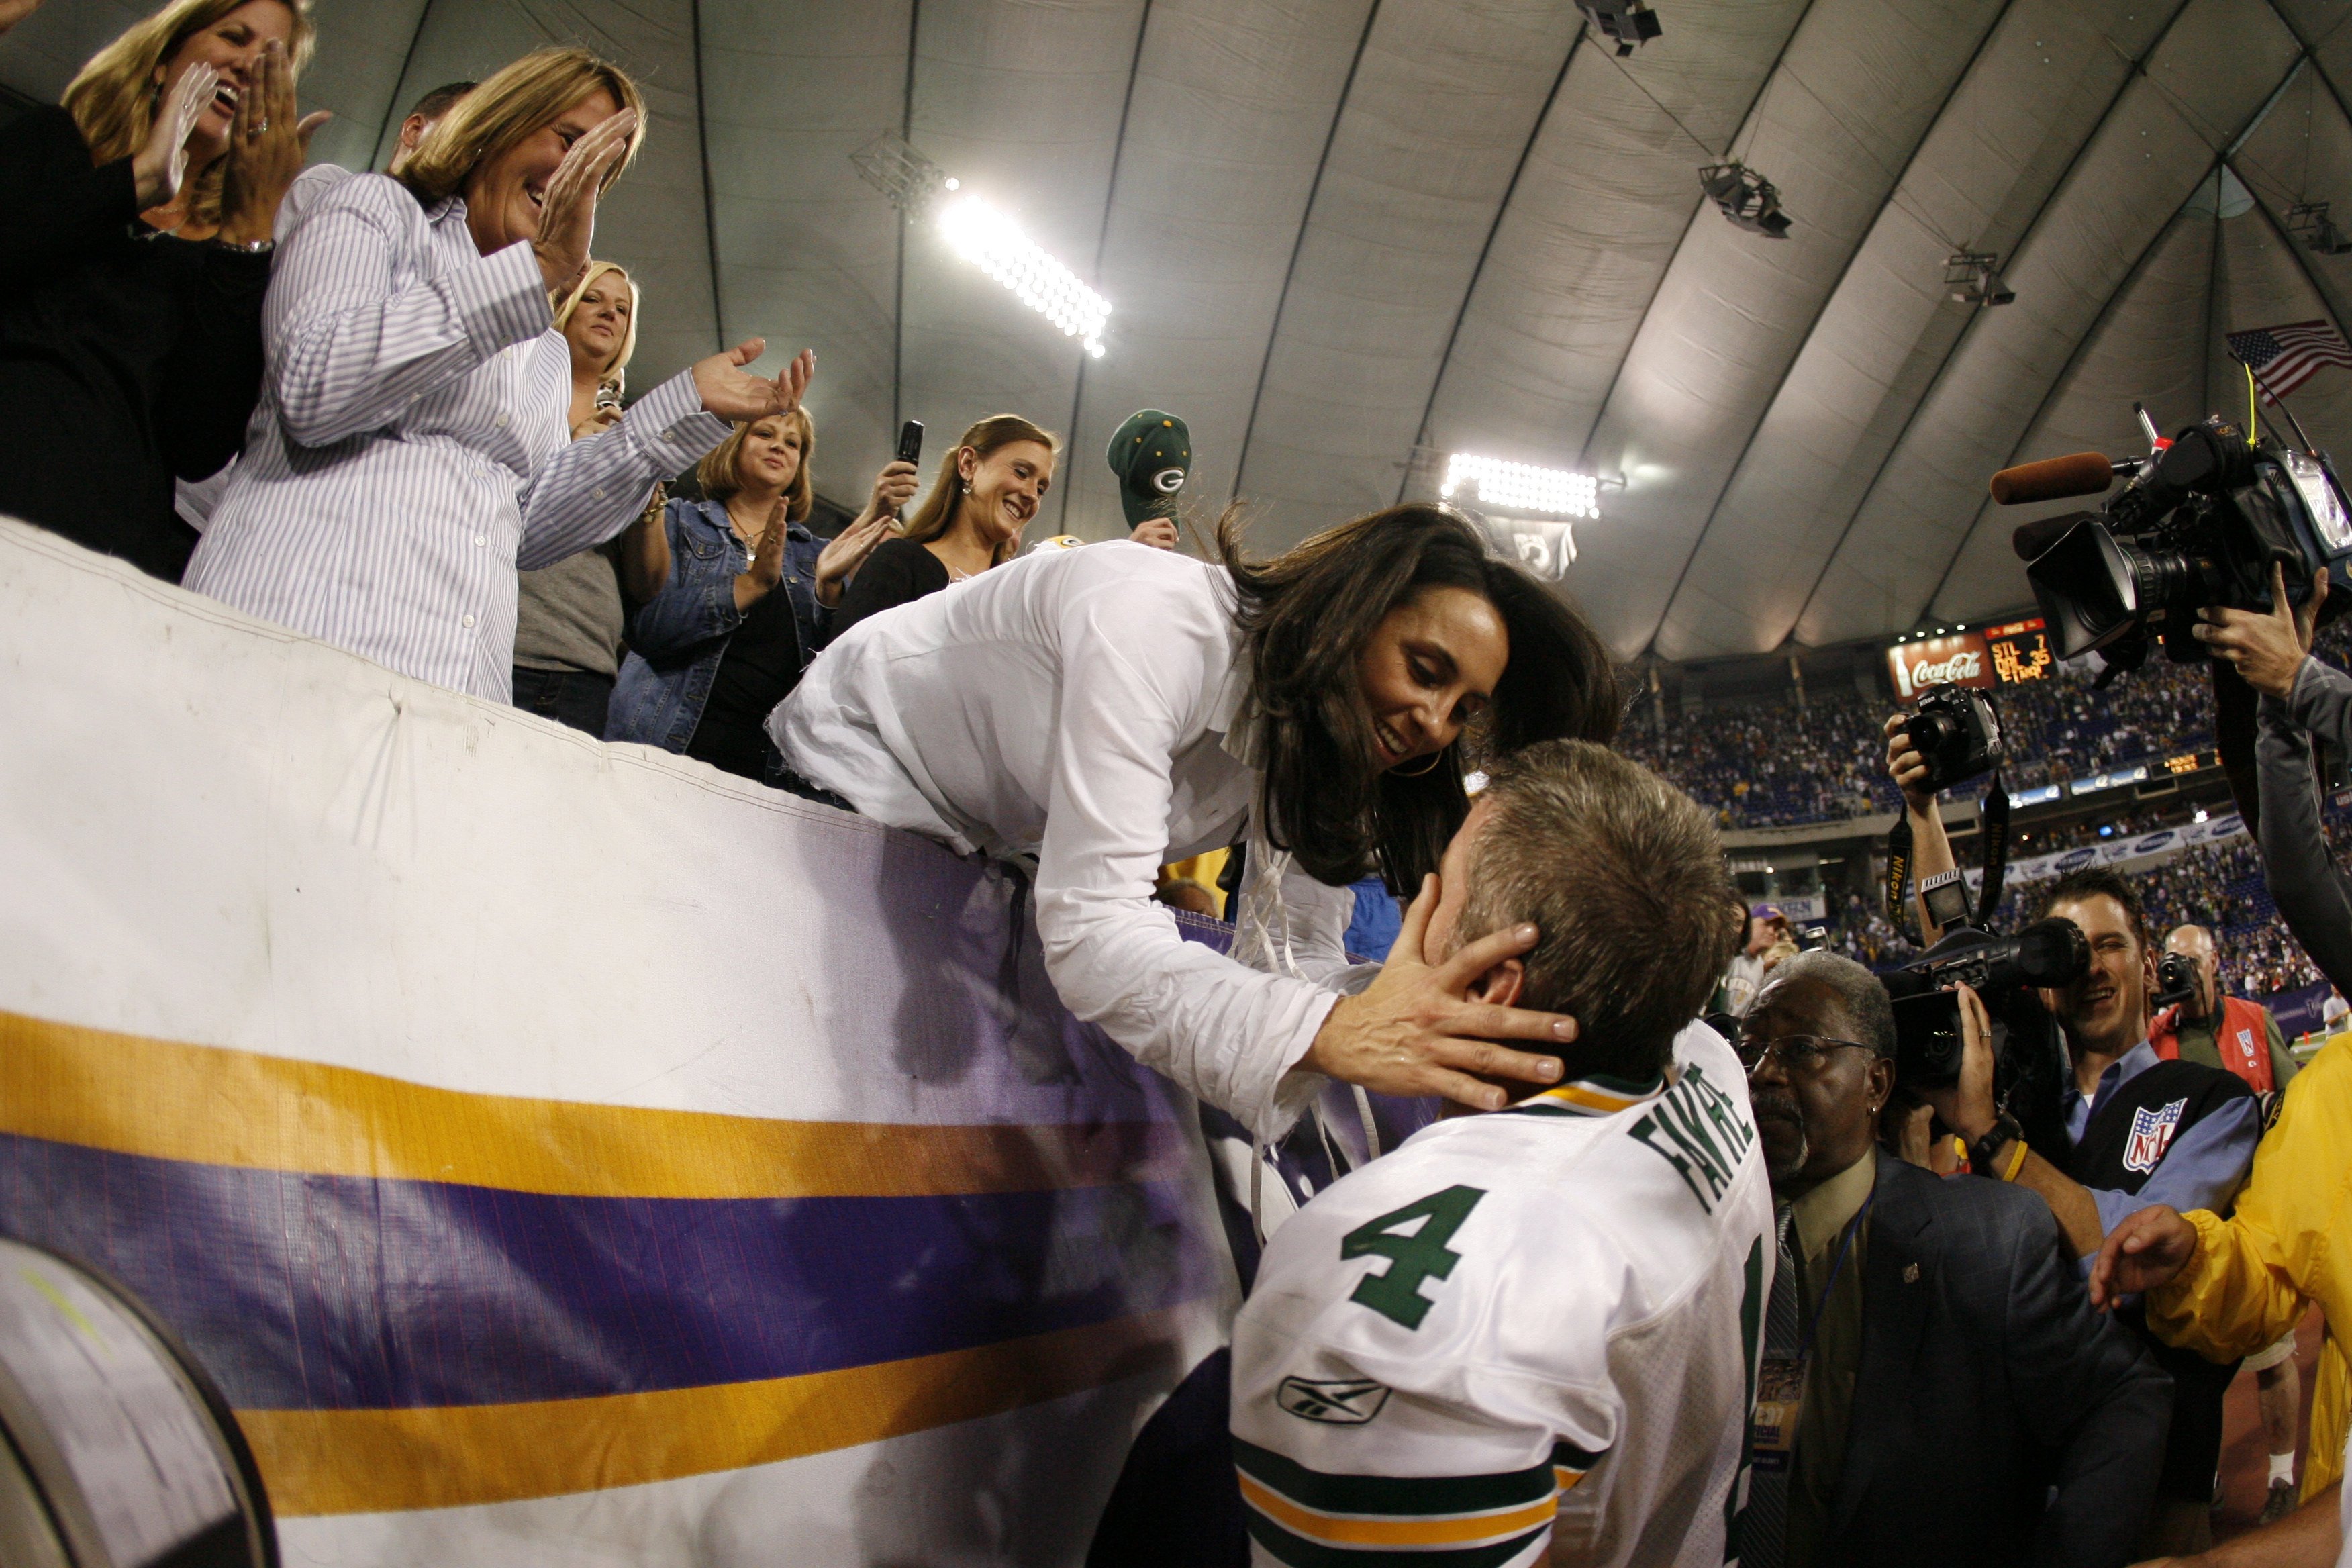 Brett Favre is congratulated by his wife Deanna after a Green Bay Packers win in 2007. | Source: Getty Images